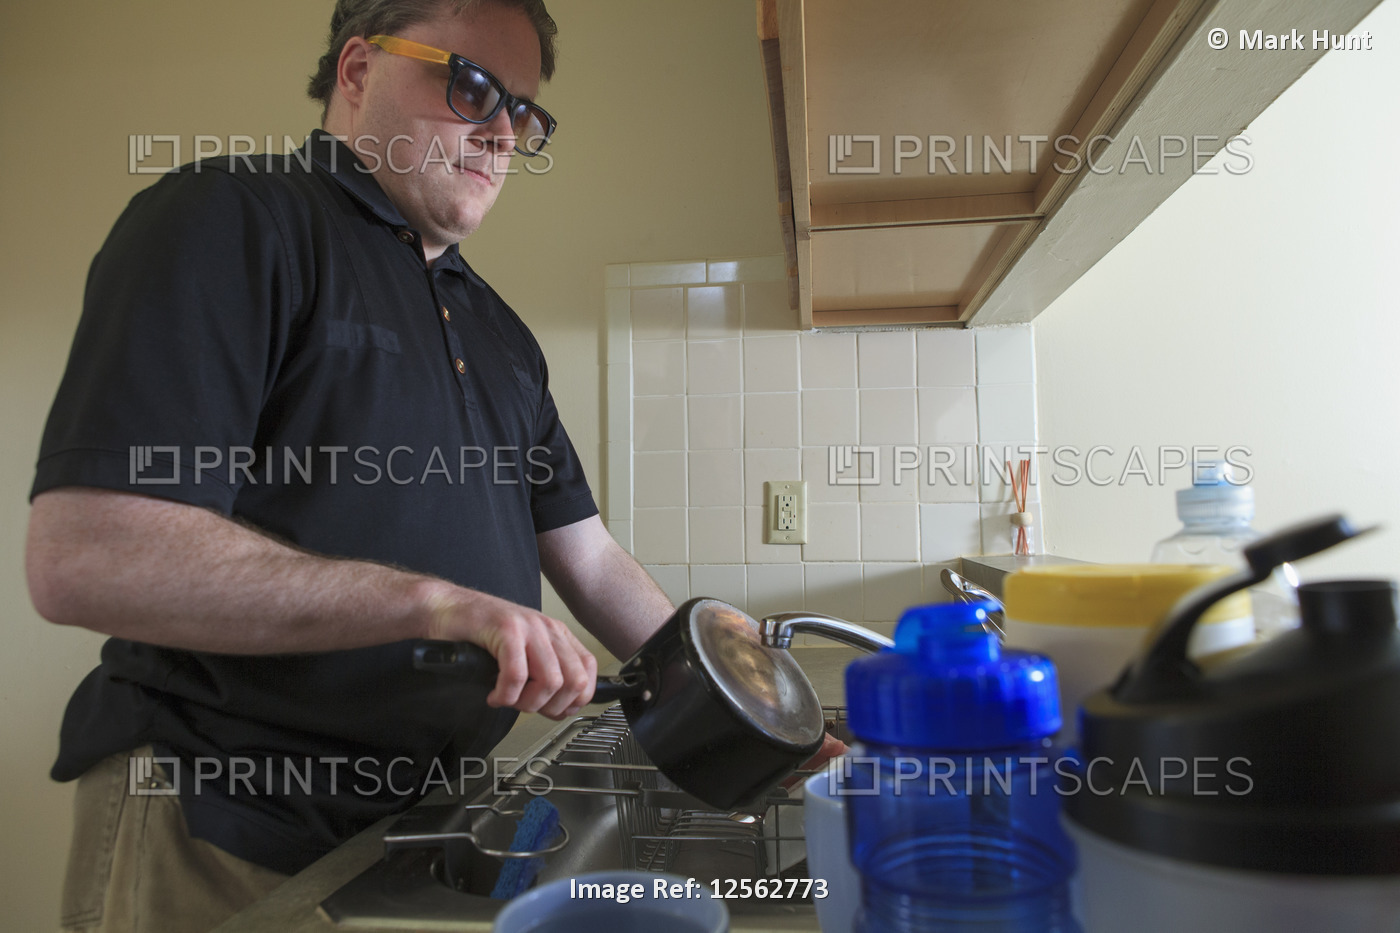 A man with a visual impairment stands at his kitchen sink washing dishes